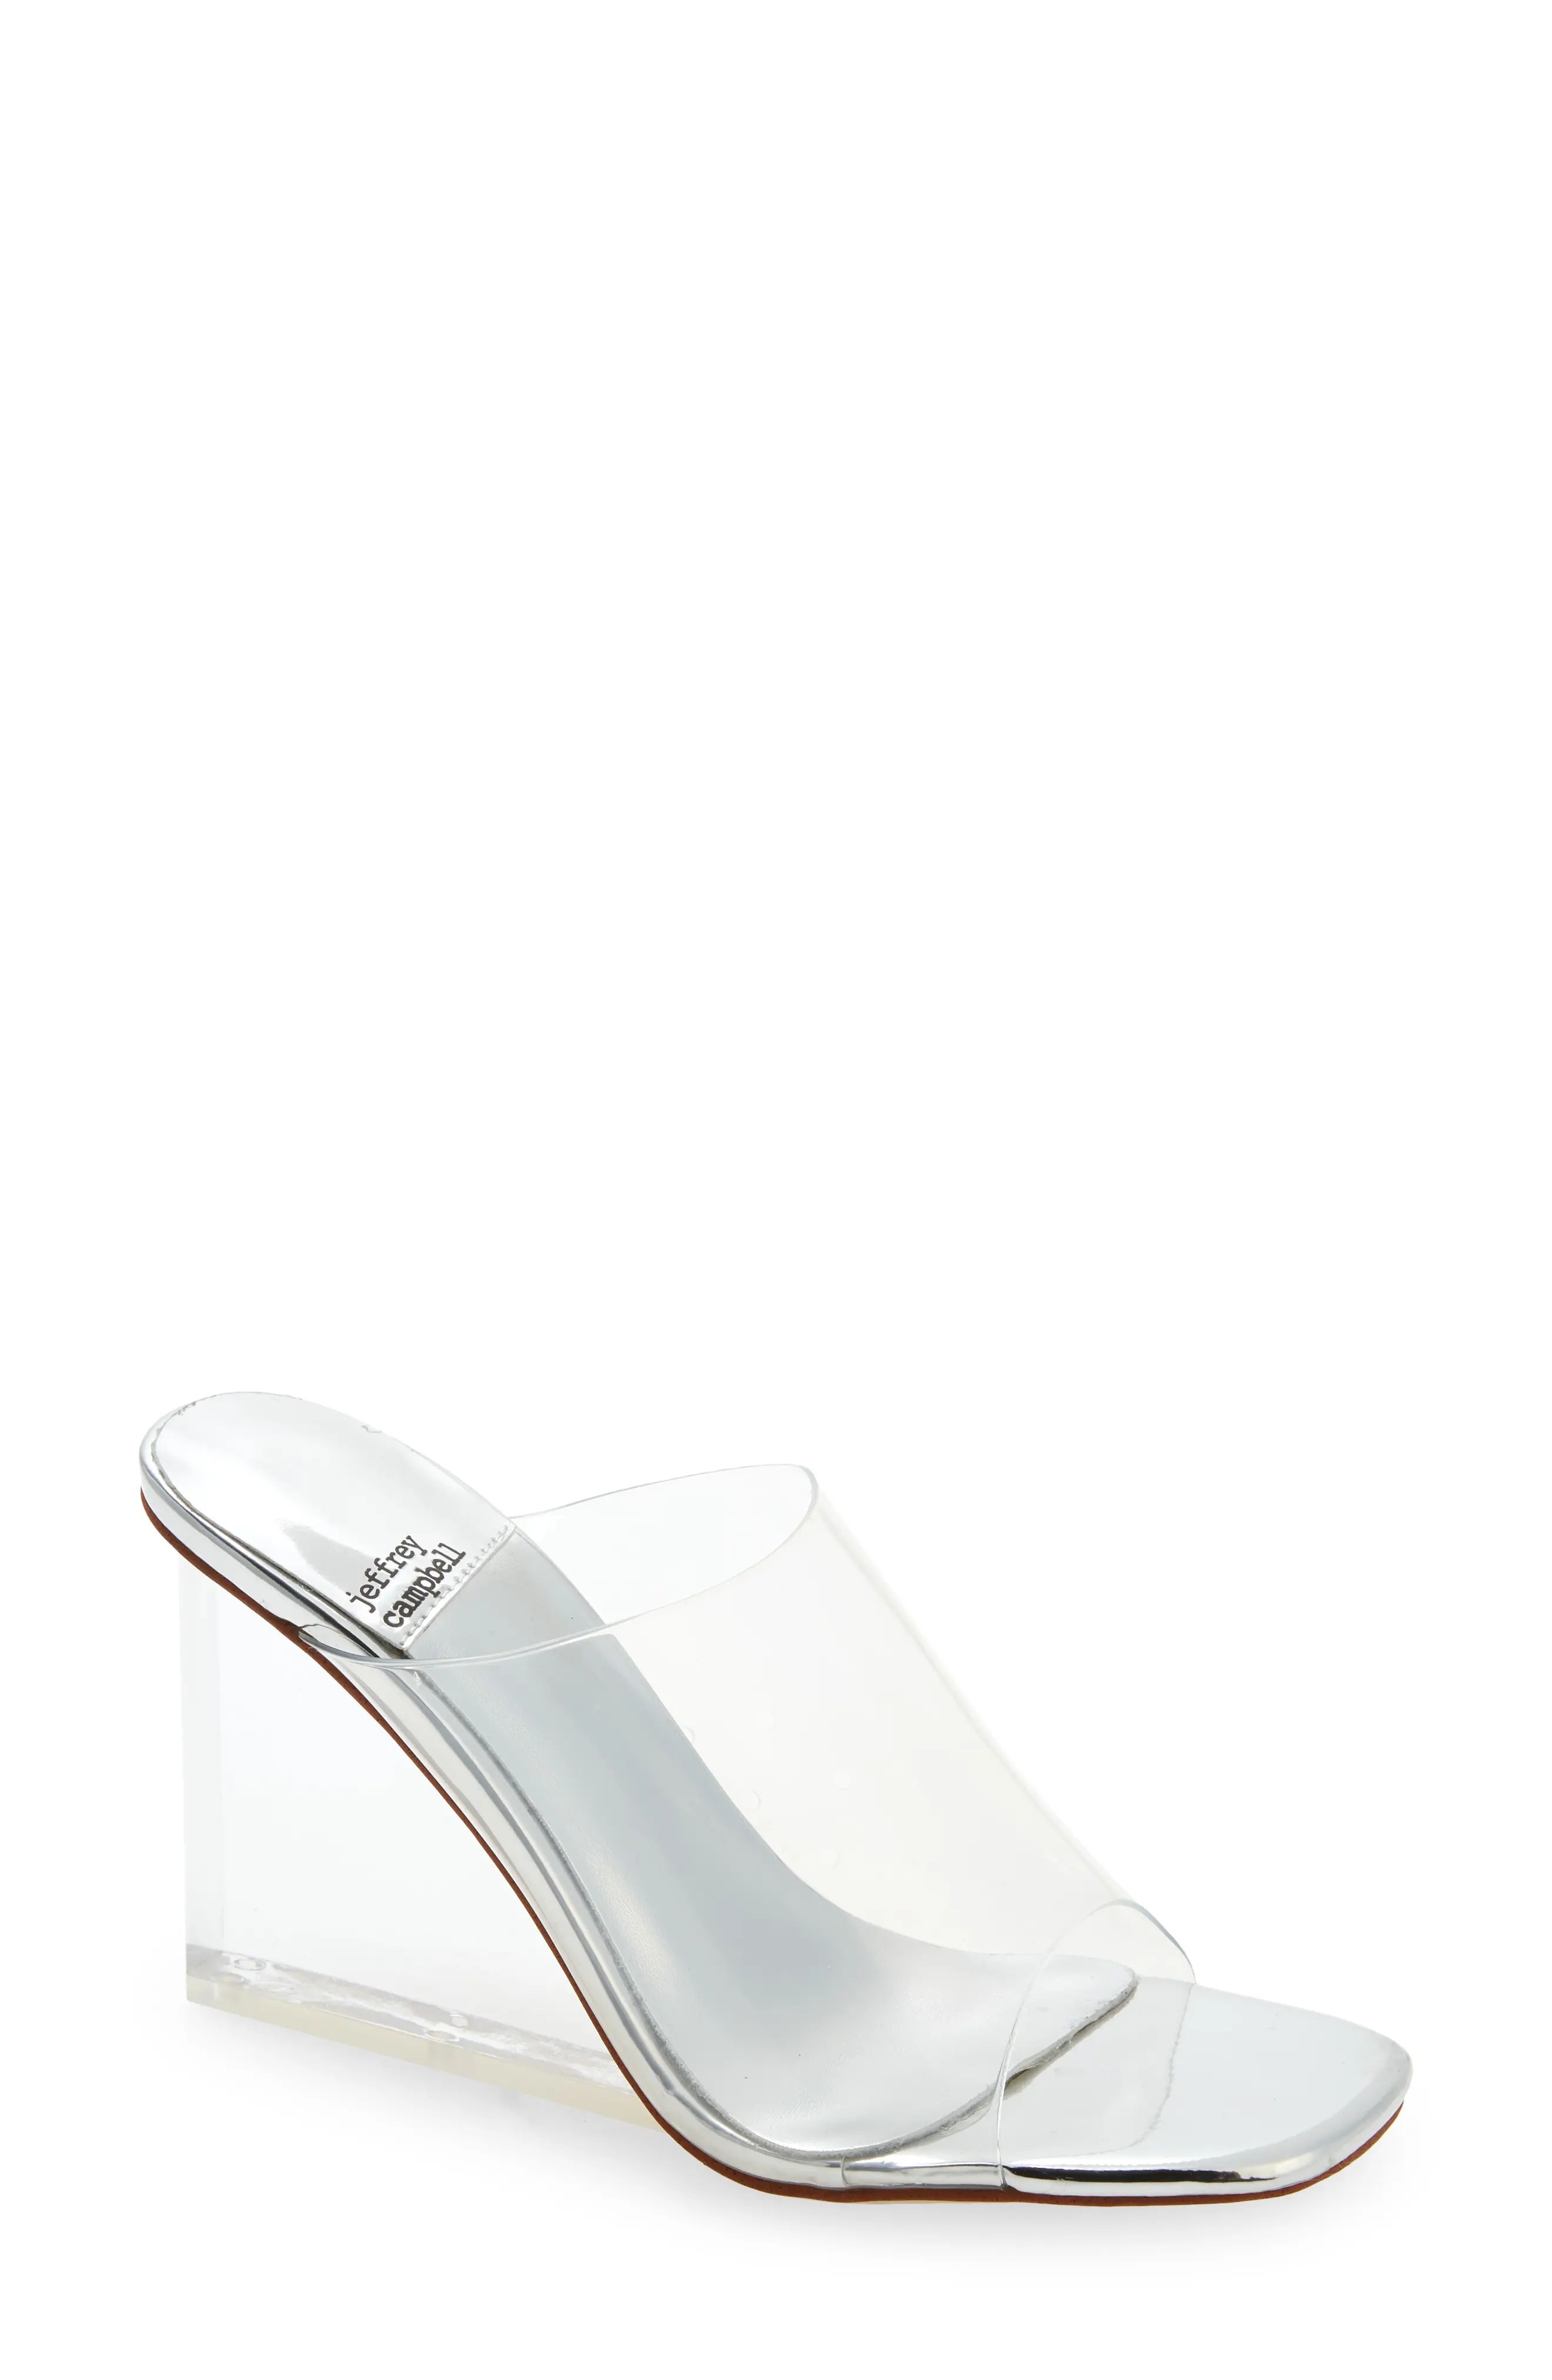 Jeffrey Campbell Acetate Wedge Mule in Silver Clear at Nordstrom, Size 10 | Nordstrom